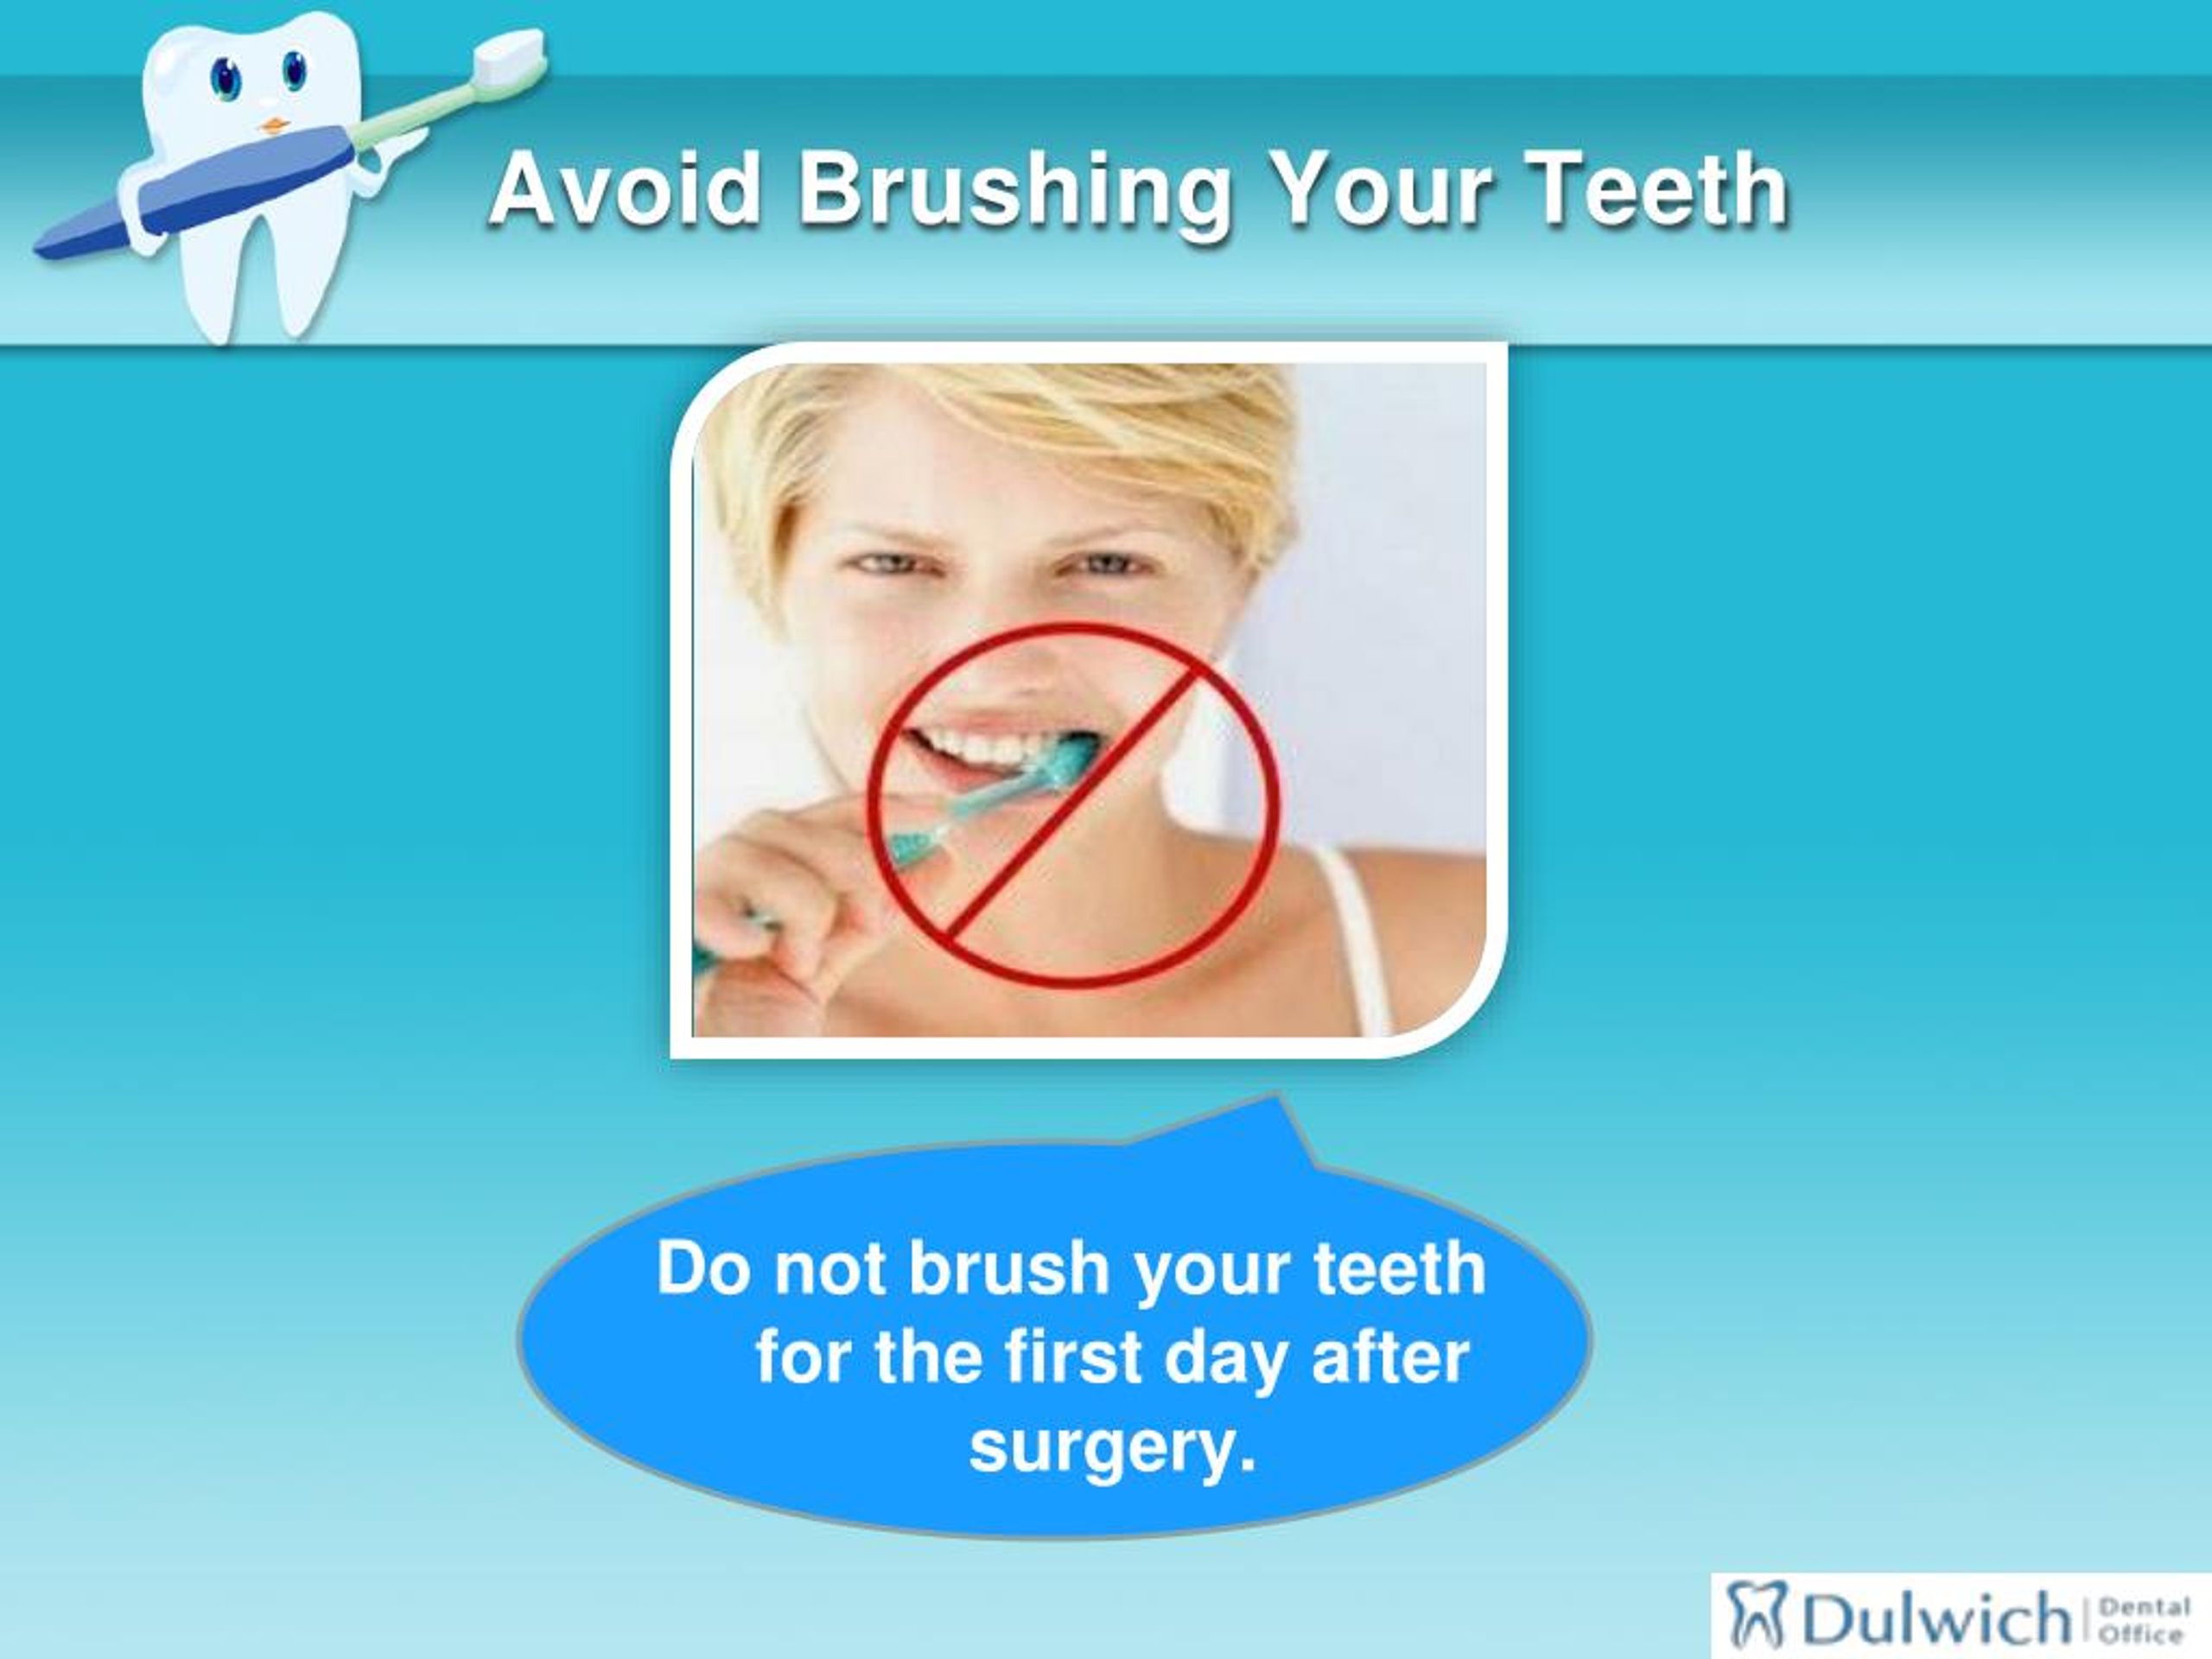 PPT 5 Tips for Brushing Your Teeth after Wisdom Teeth